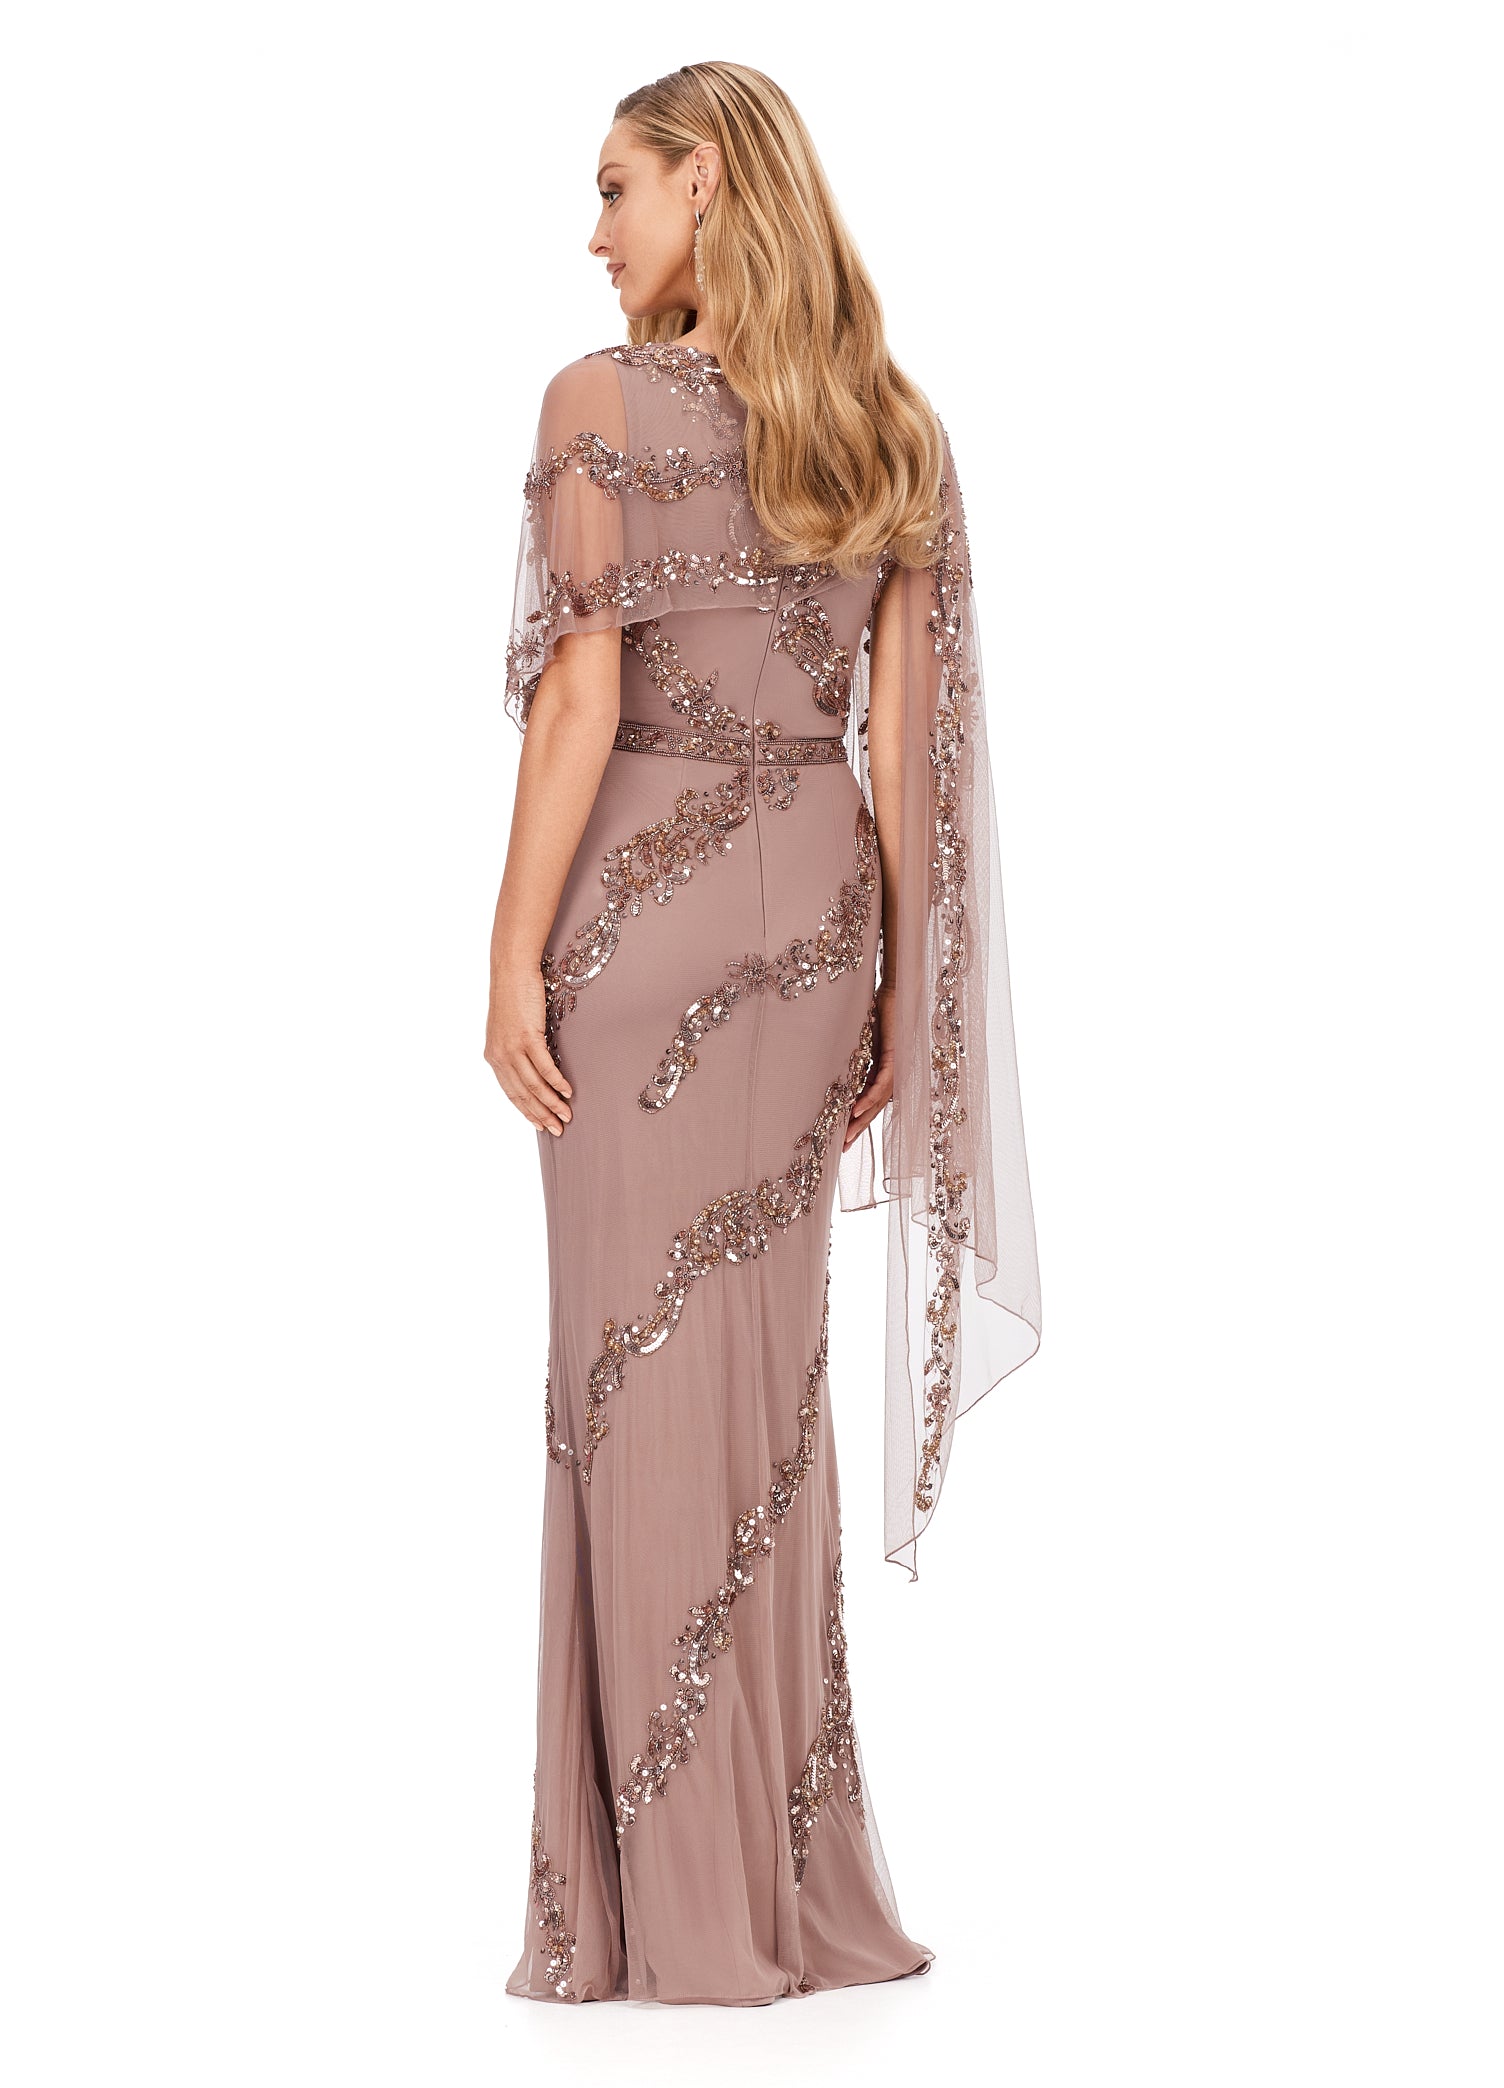 Ashley Lauren 11213 Asymmetric Detachable Overlay High Back Fully Hand Beaded Crew Neckline Evening Dress. This stunning evening gown is complete with an intricate bead motif. The bustier is adorned with an asymmetrical overlay which falls down the left arm.